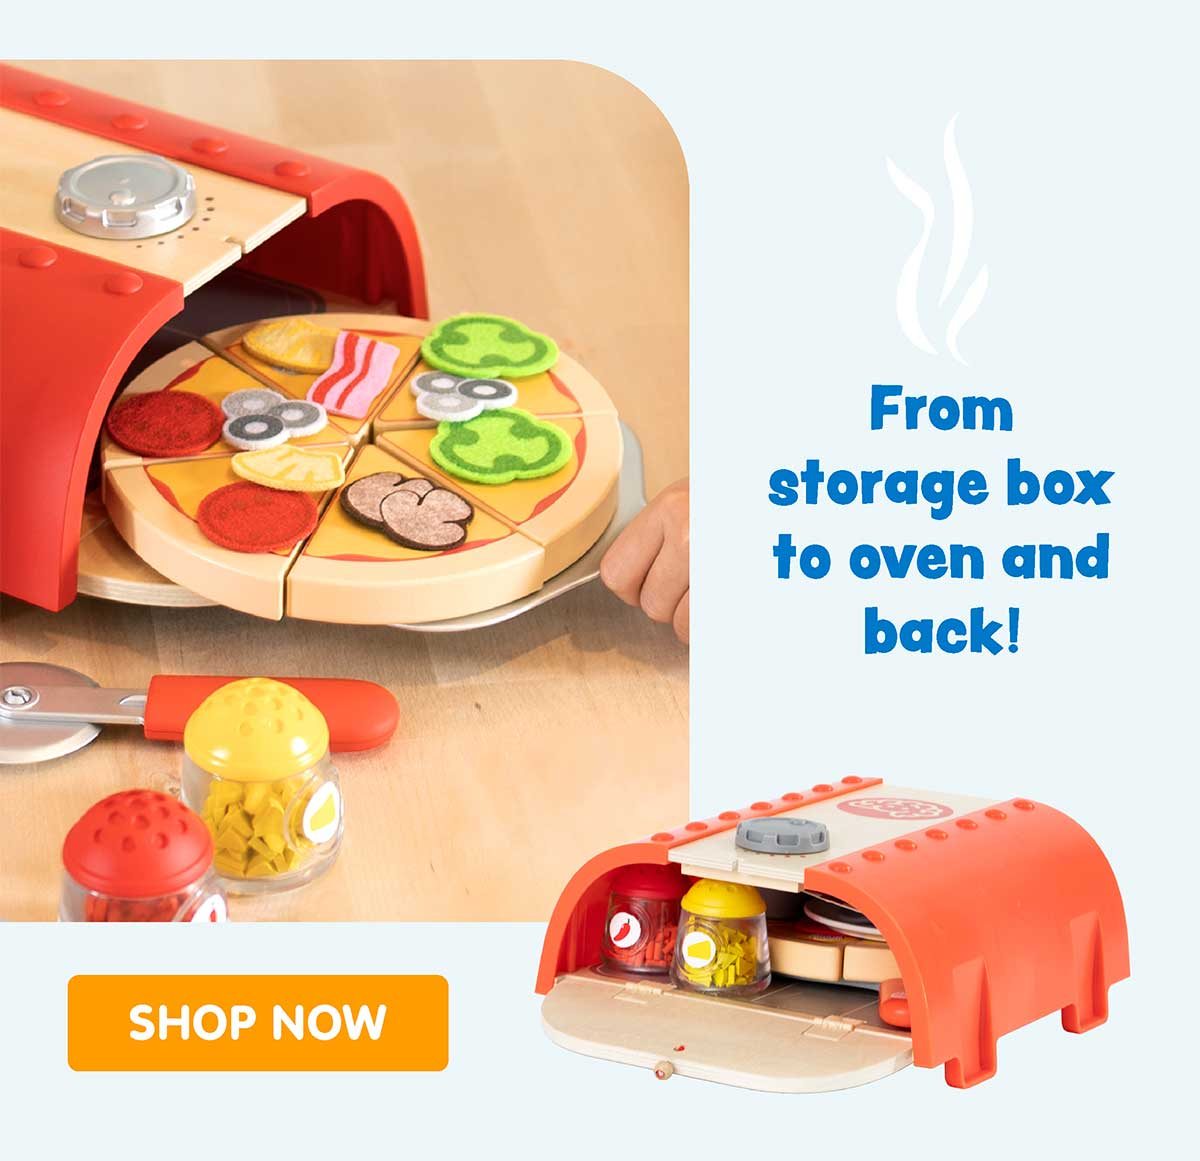 From stroage box to oven and back! Shop Now!